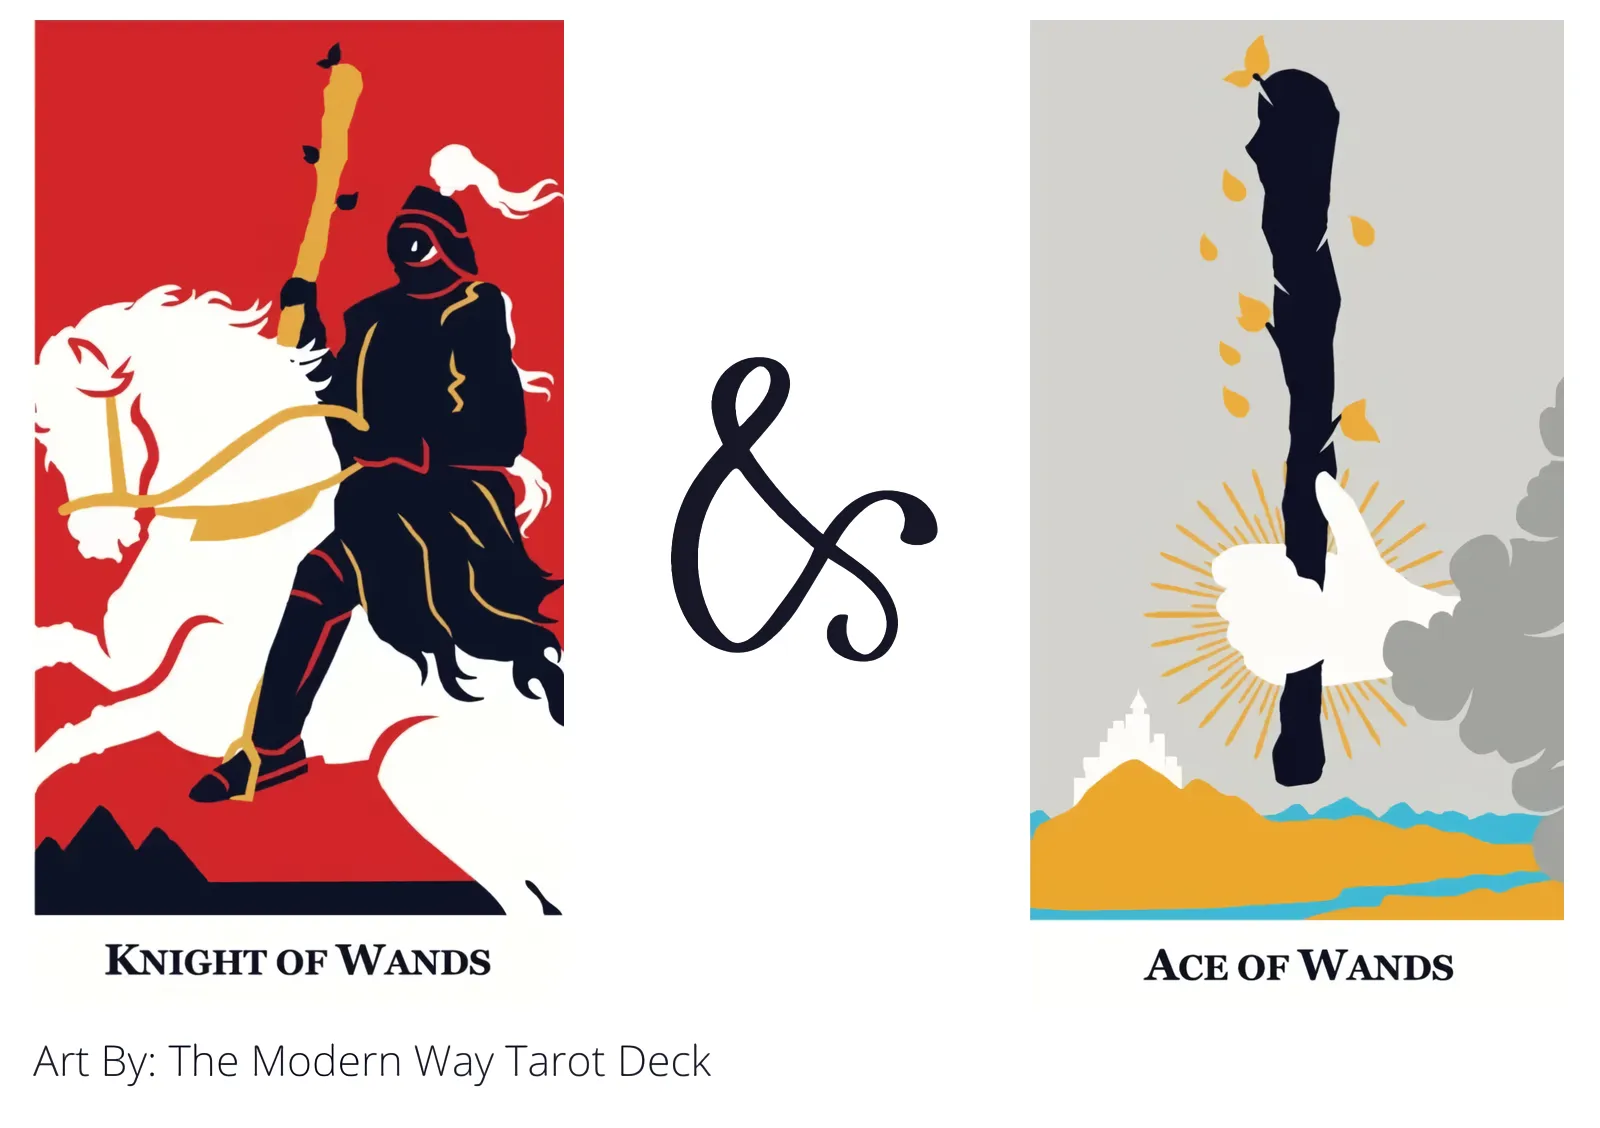 knight of wands and ace of wands tarot cards together